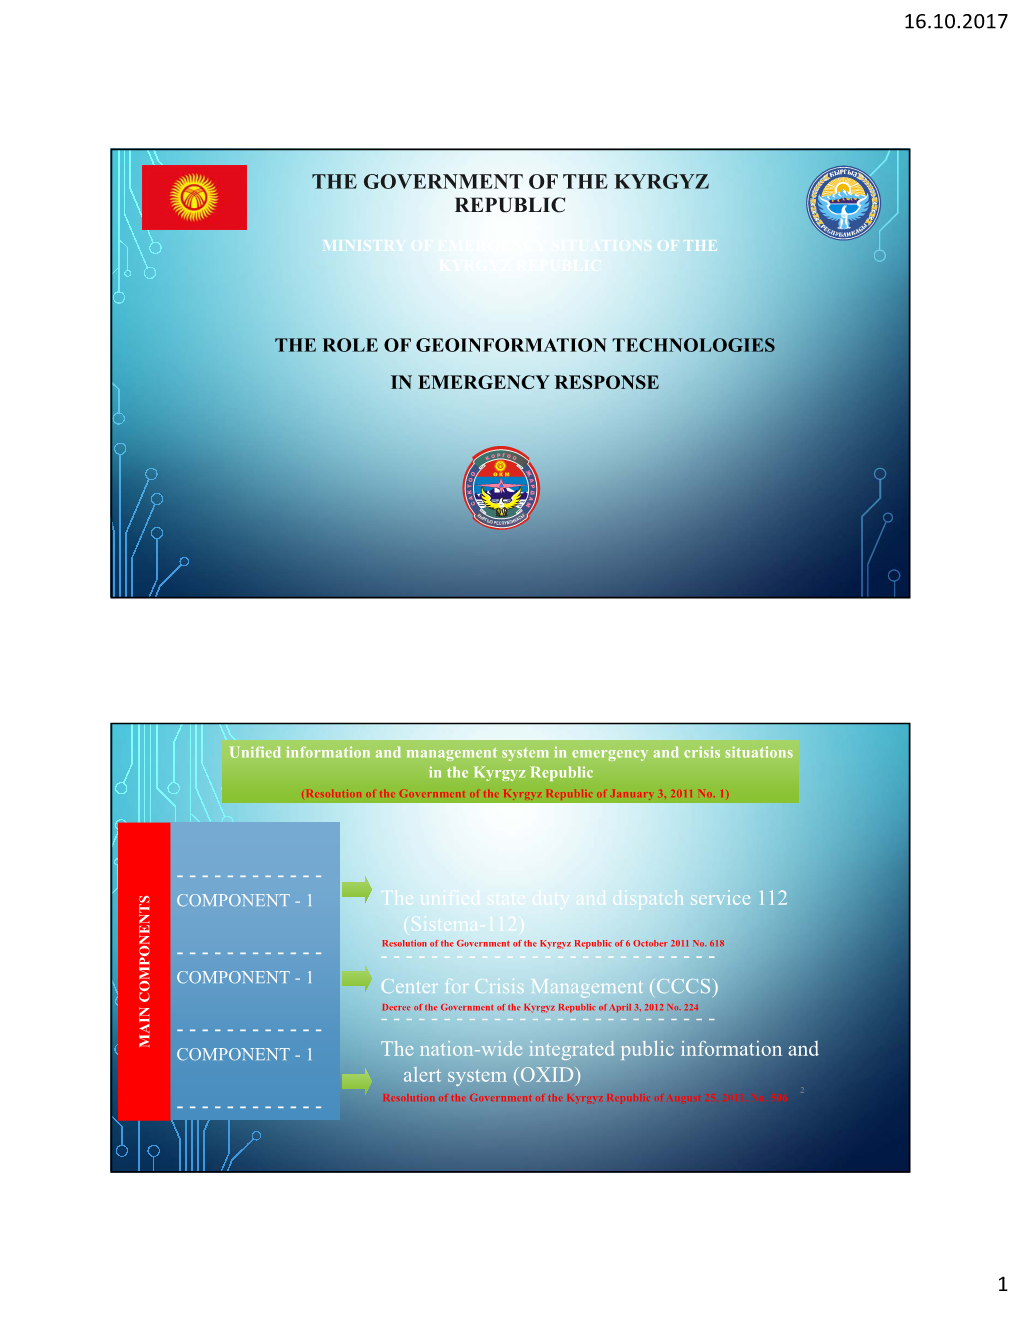 The Government of the Kyrgyz Republic